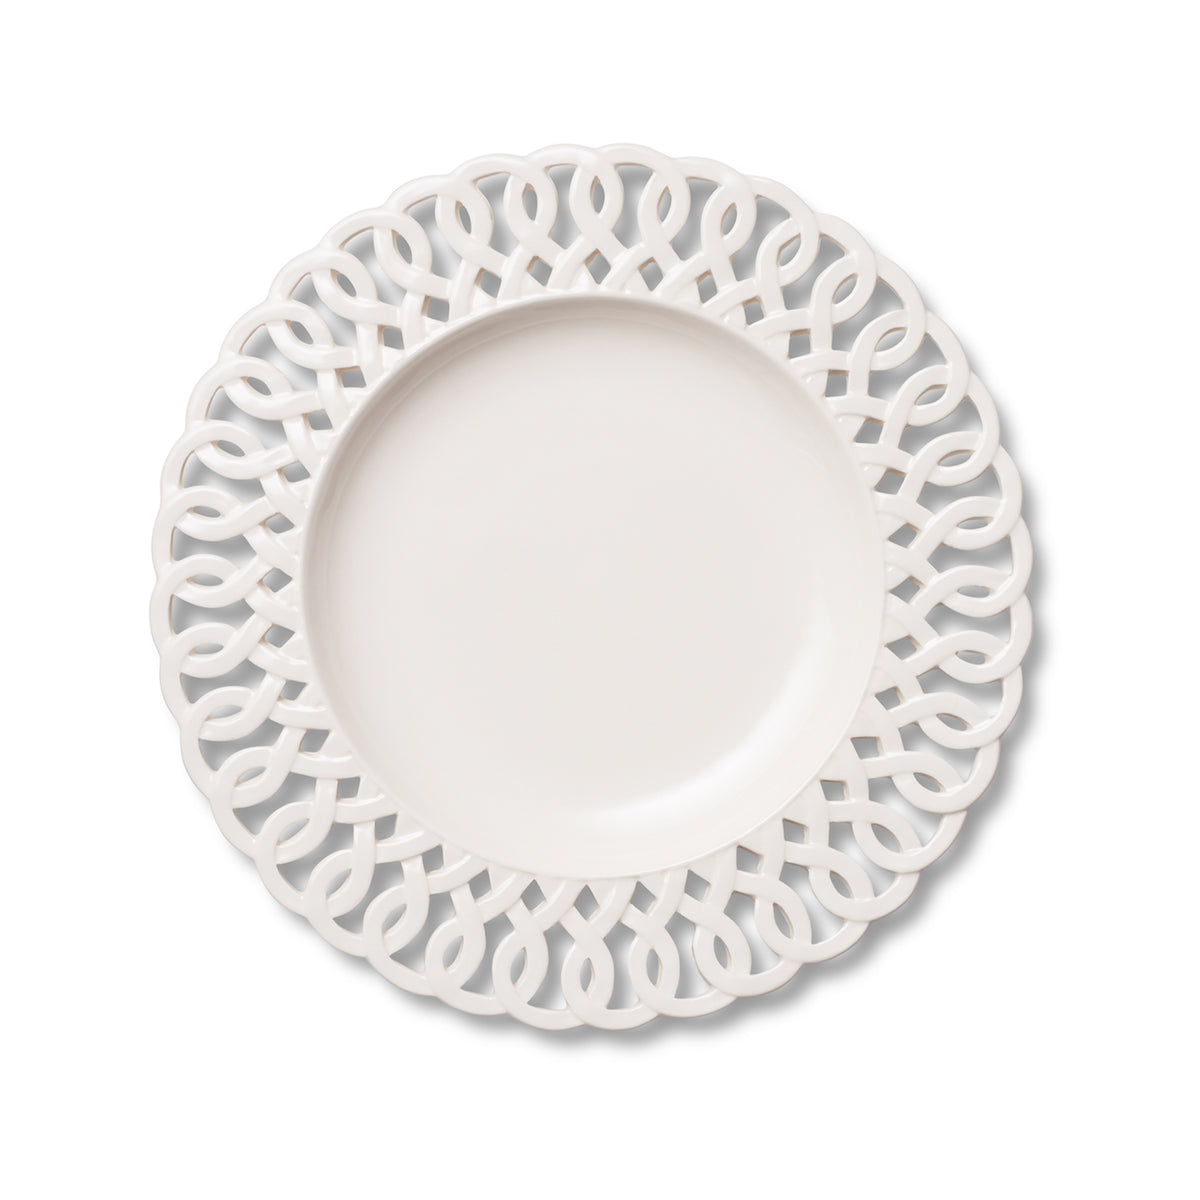 Paulette Salad Plate in White